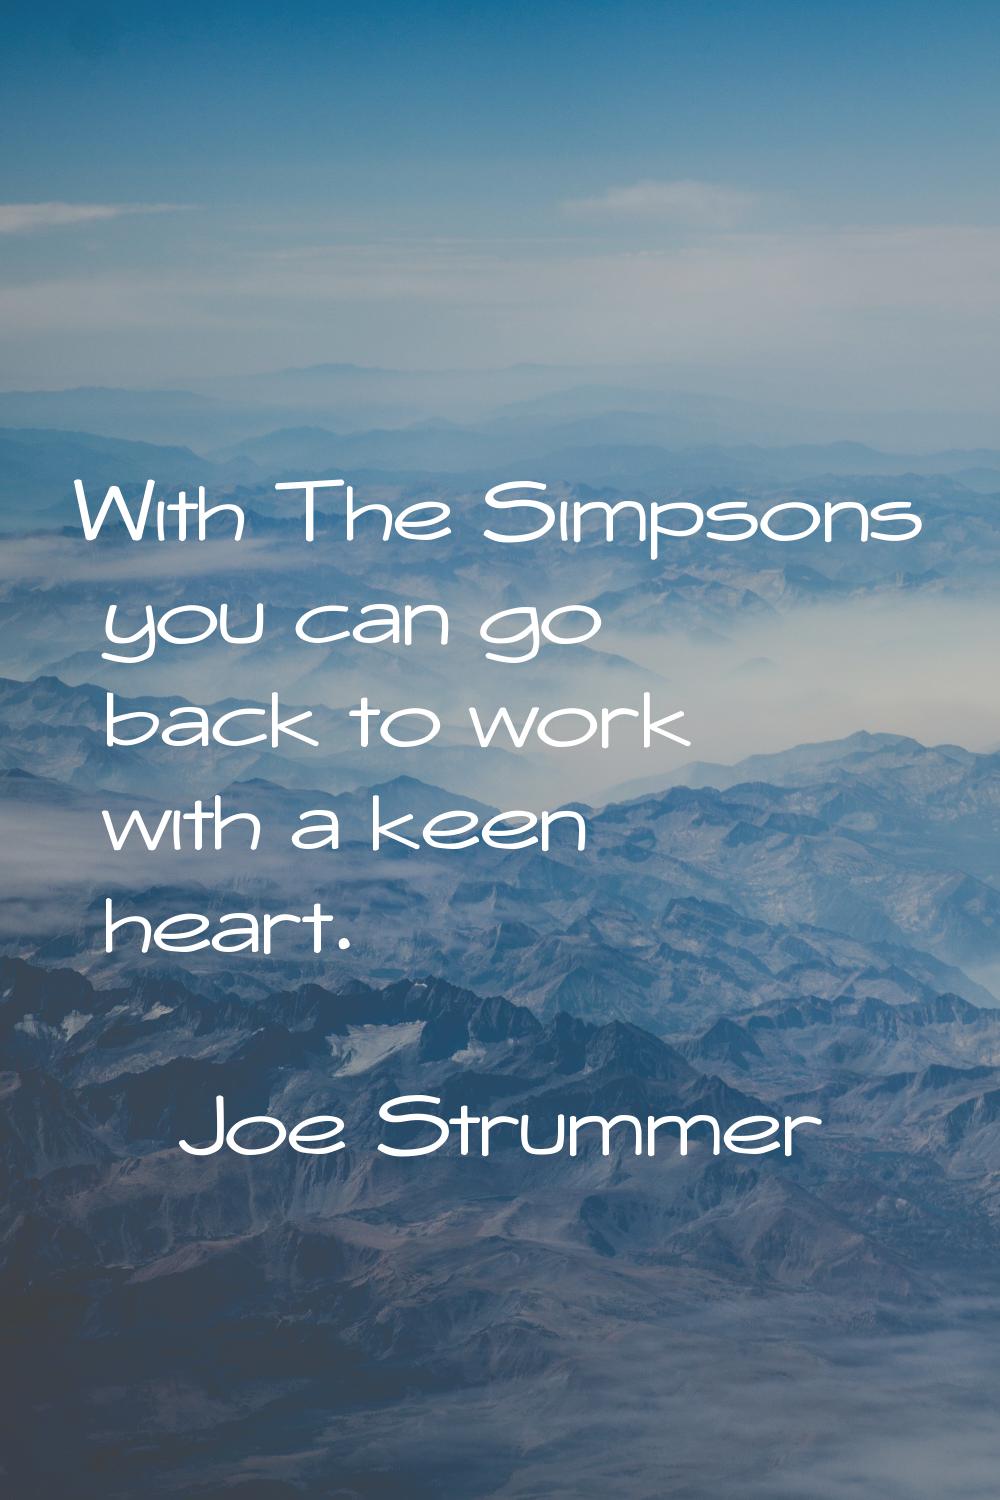 With The Simpsons you can go back to work with a keen heart.